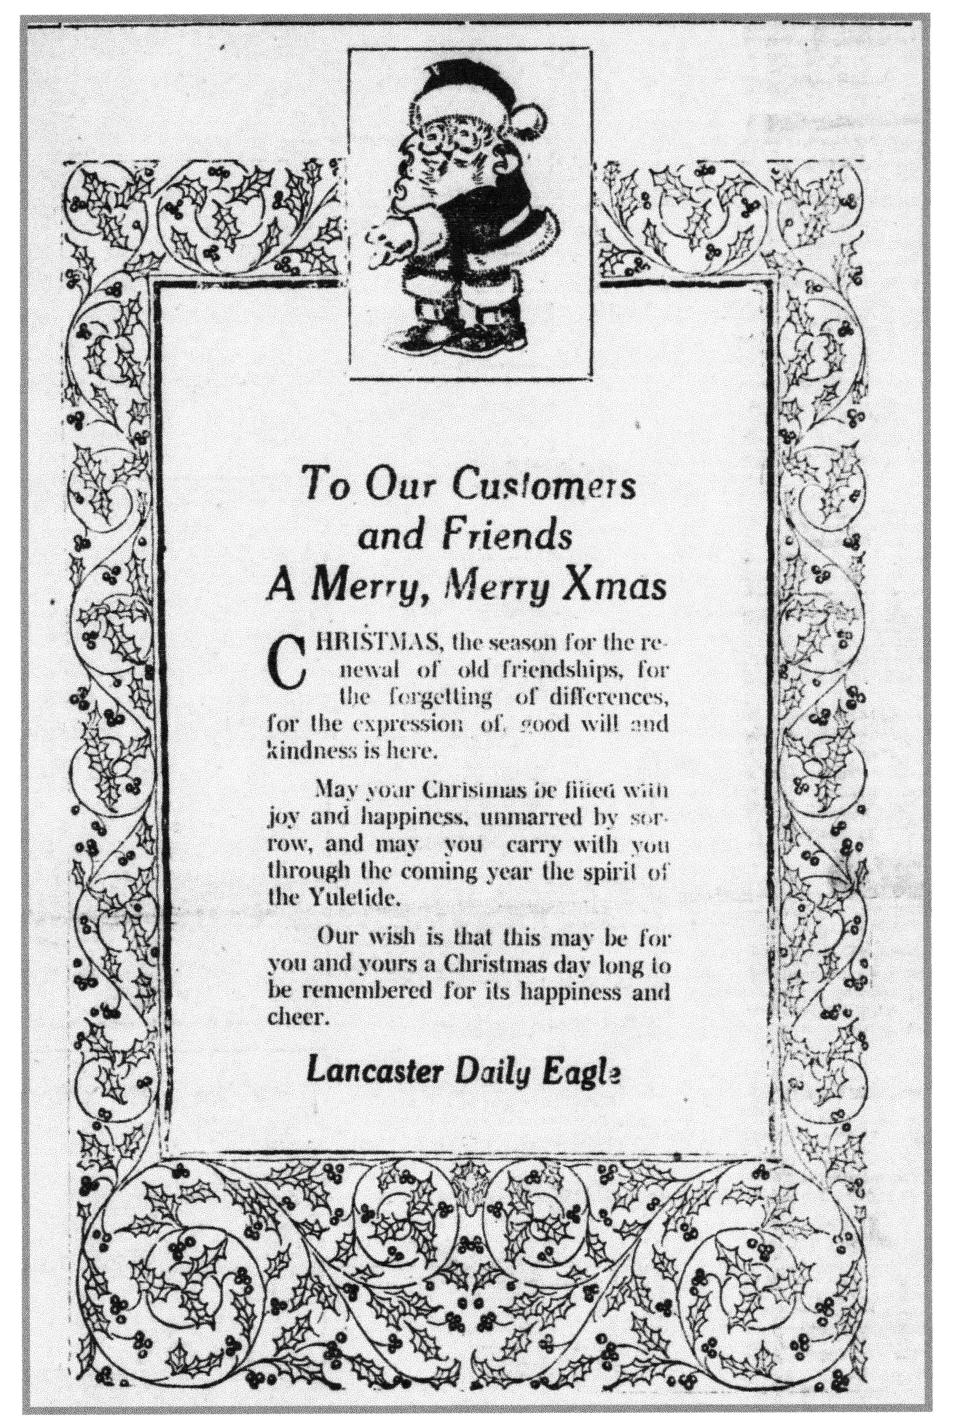 The Daily Eagle wished its customers in 1922 a merry, merry Xmas. (Daily Eagle 23 Dec. 1922).